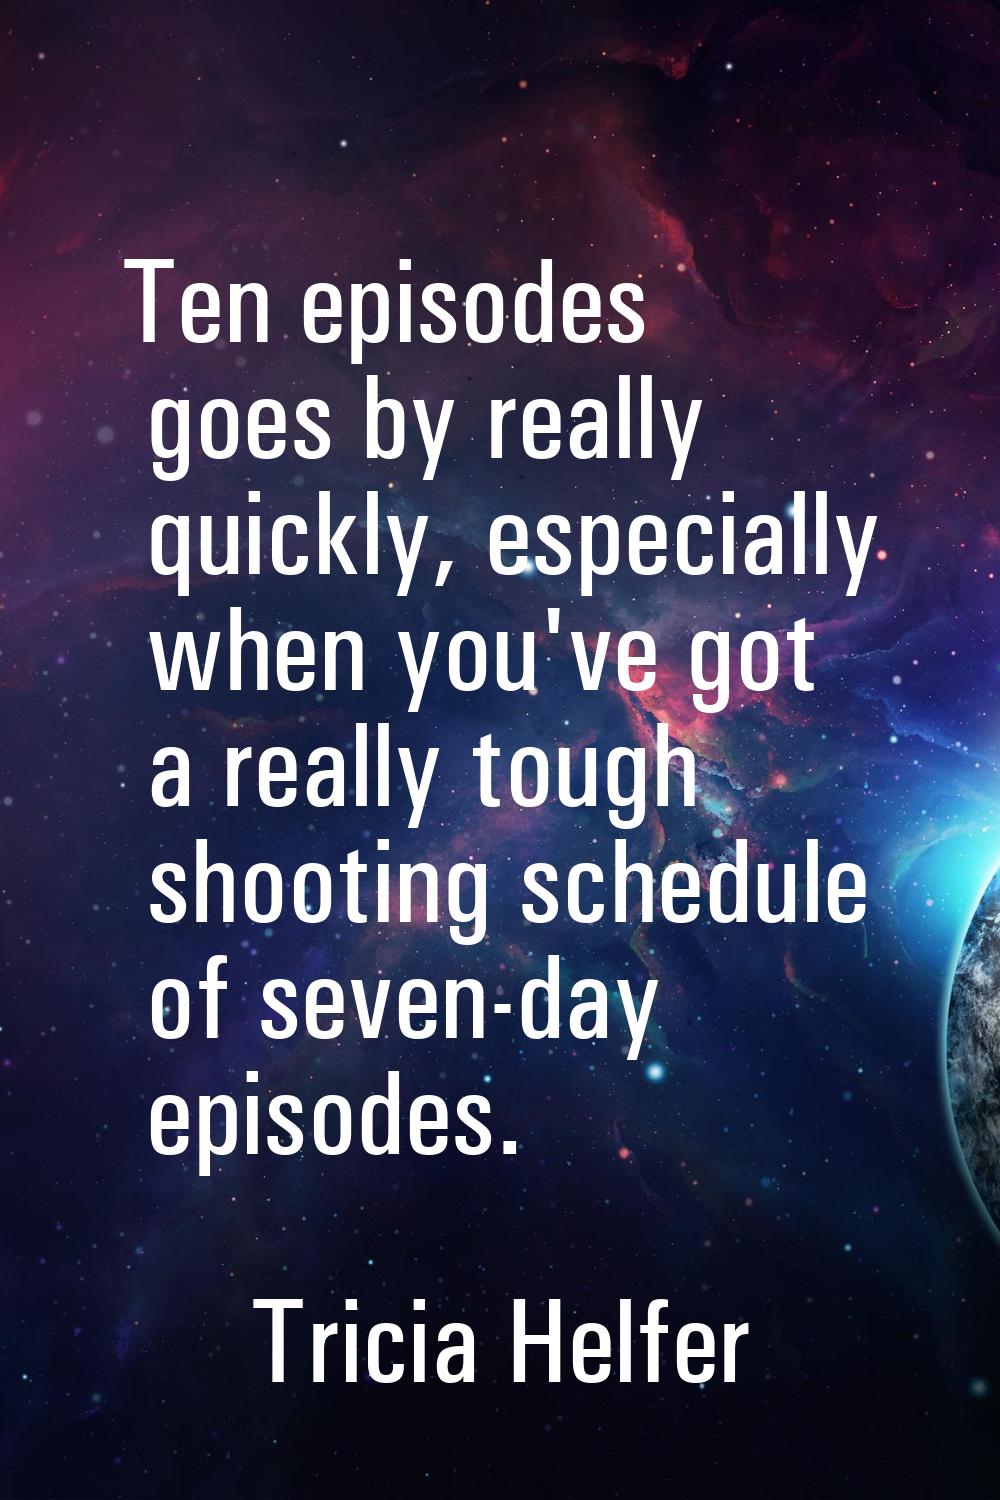 Ten episodes goes by really quickly, especially when you've got a really tough shooting schedule of